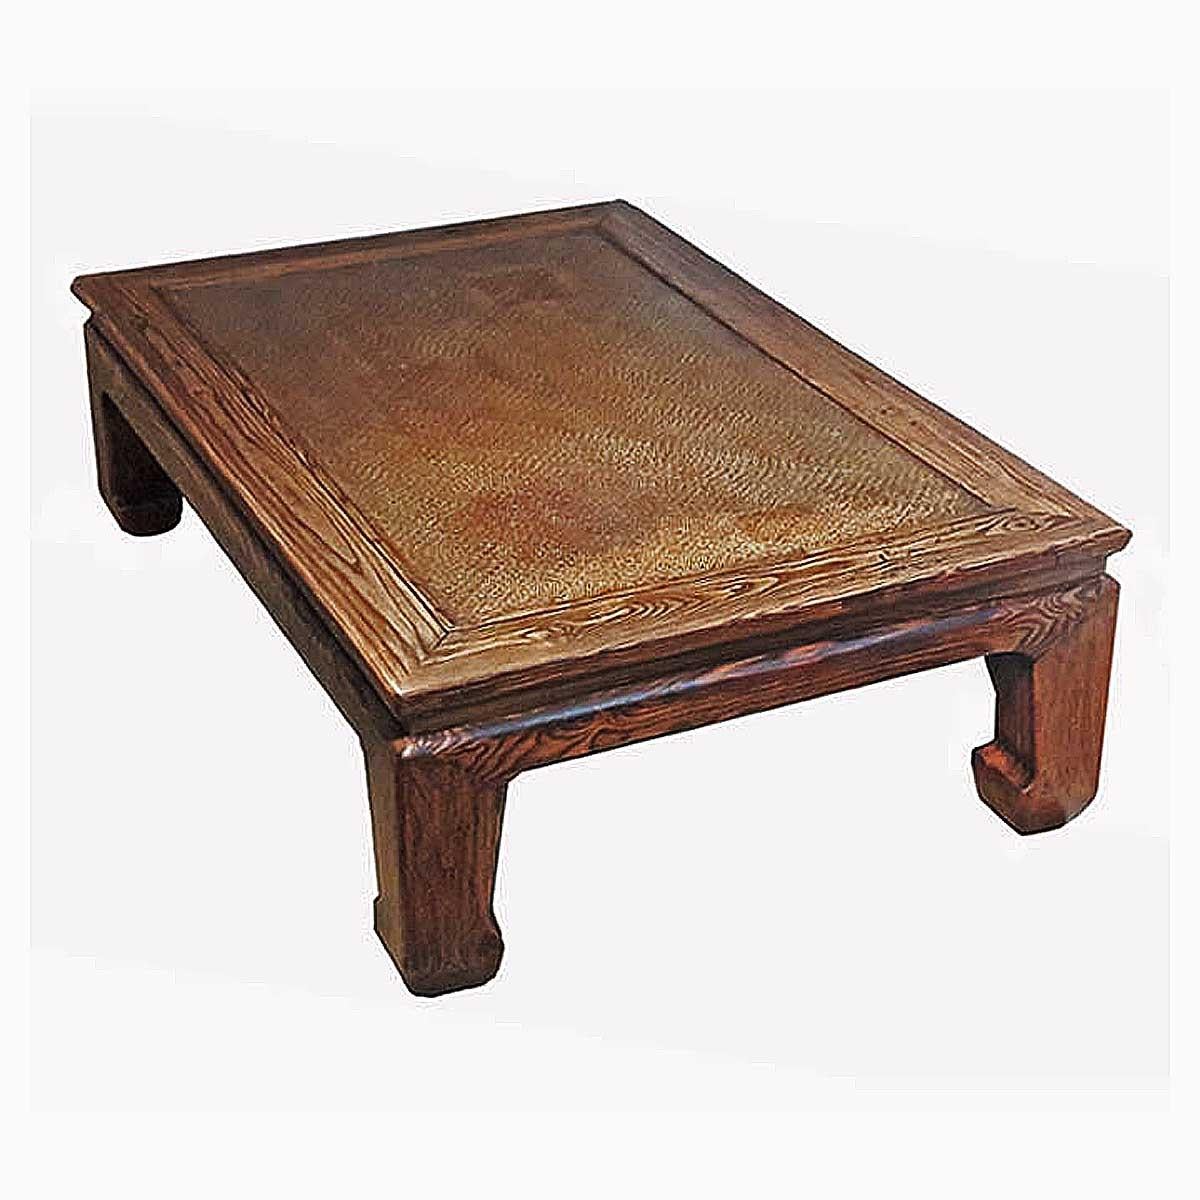 Qing 19th Century Elm Wood Coffee Table from China